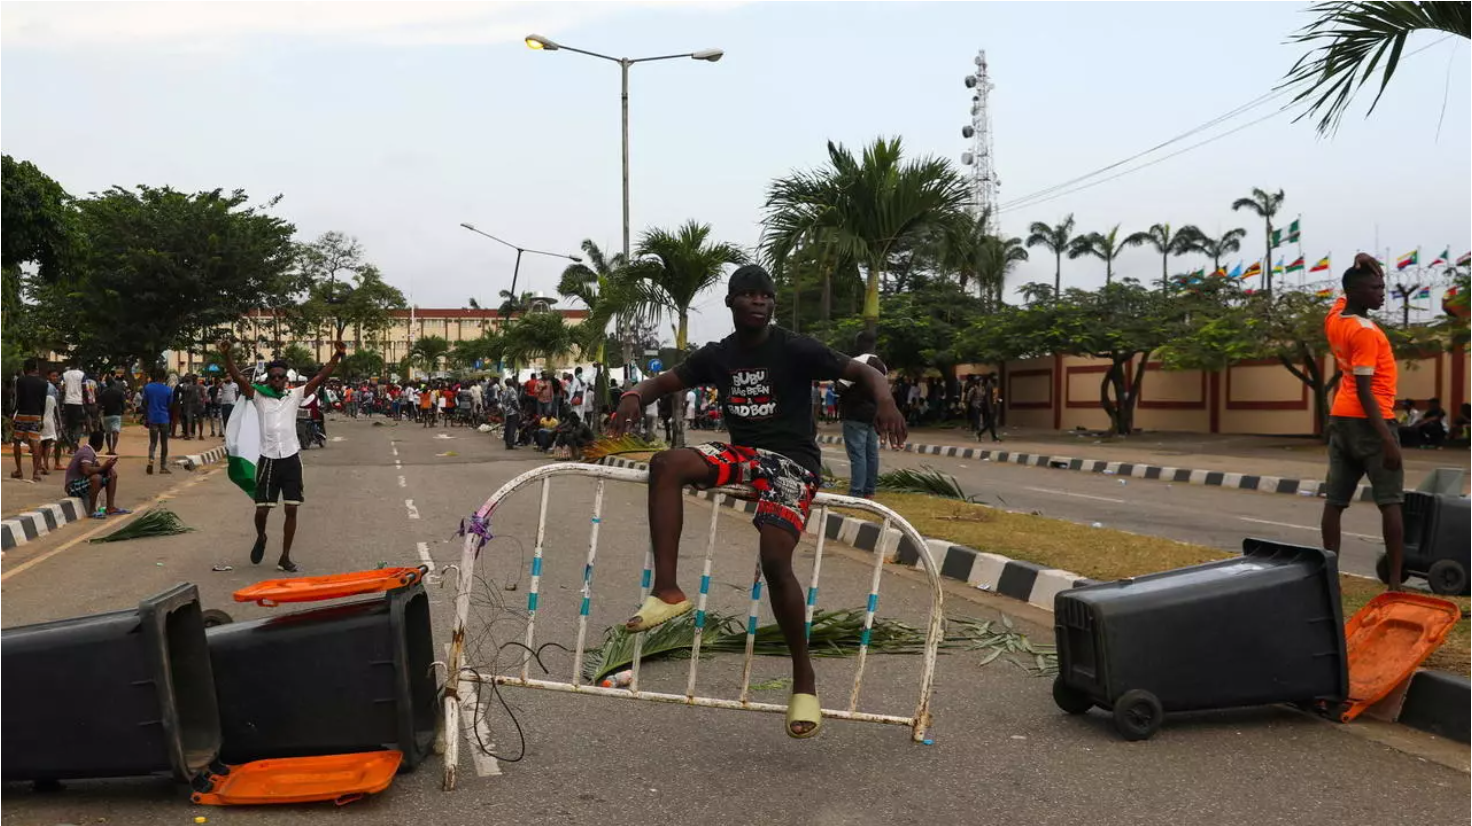 A demonstrator sits on a barricade blocking a road near the Lagos State House, despite a round-the-clock curfew imposed by the authorities on the Nigerian state of Lagos in response to protests against alleged police brutality, Nigeria October 20, 2020.